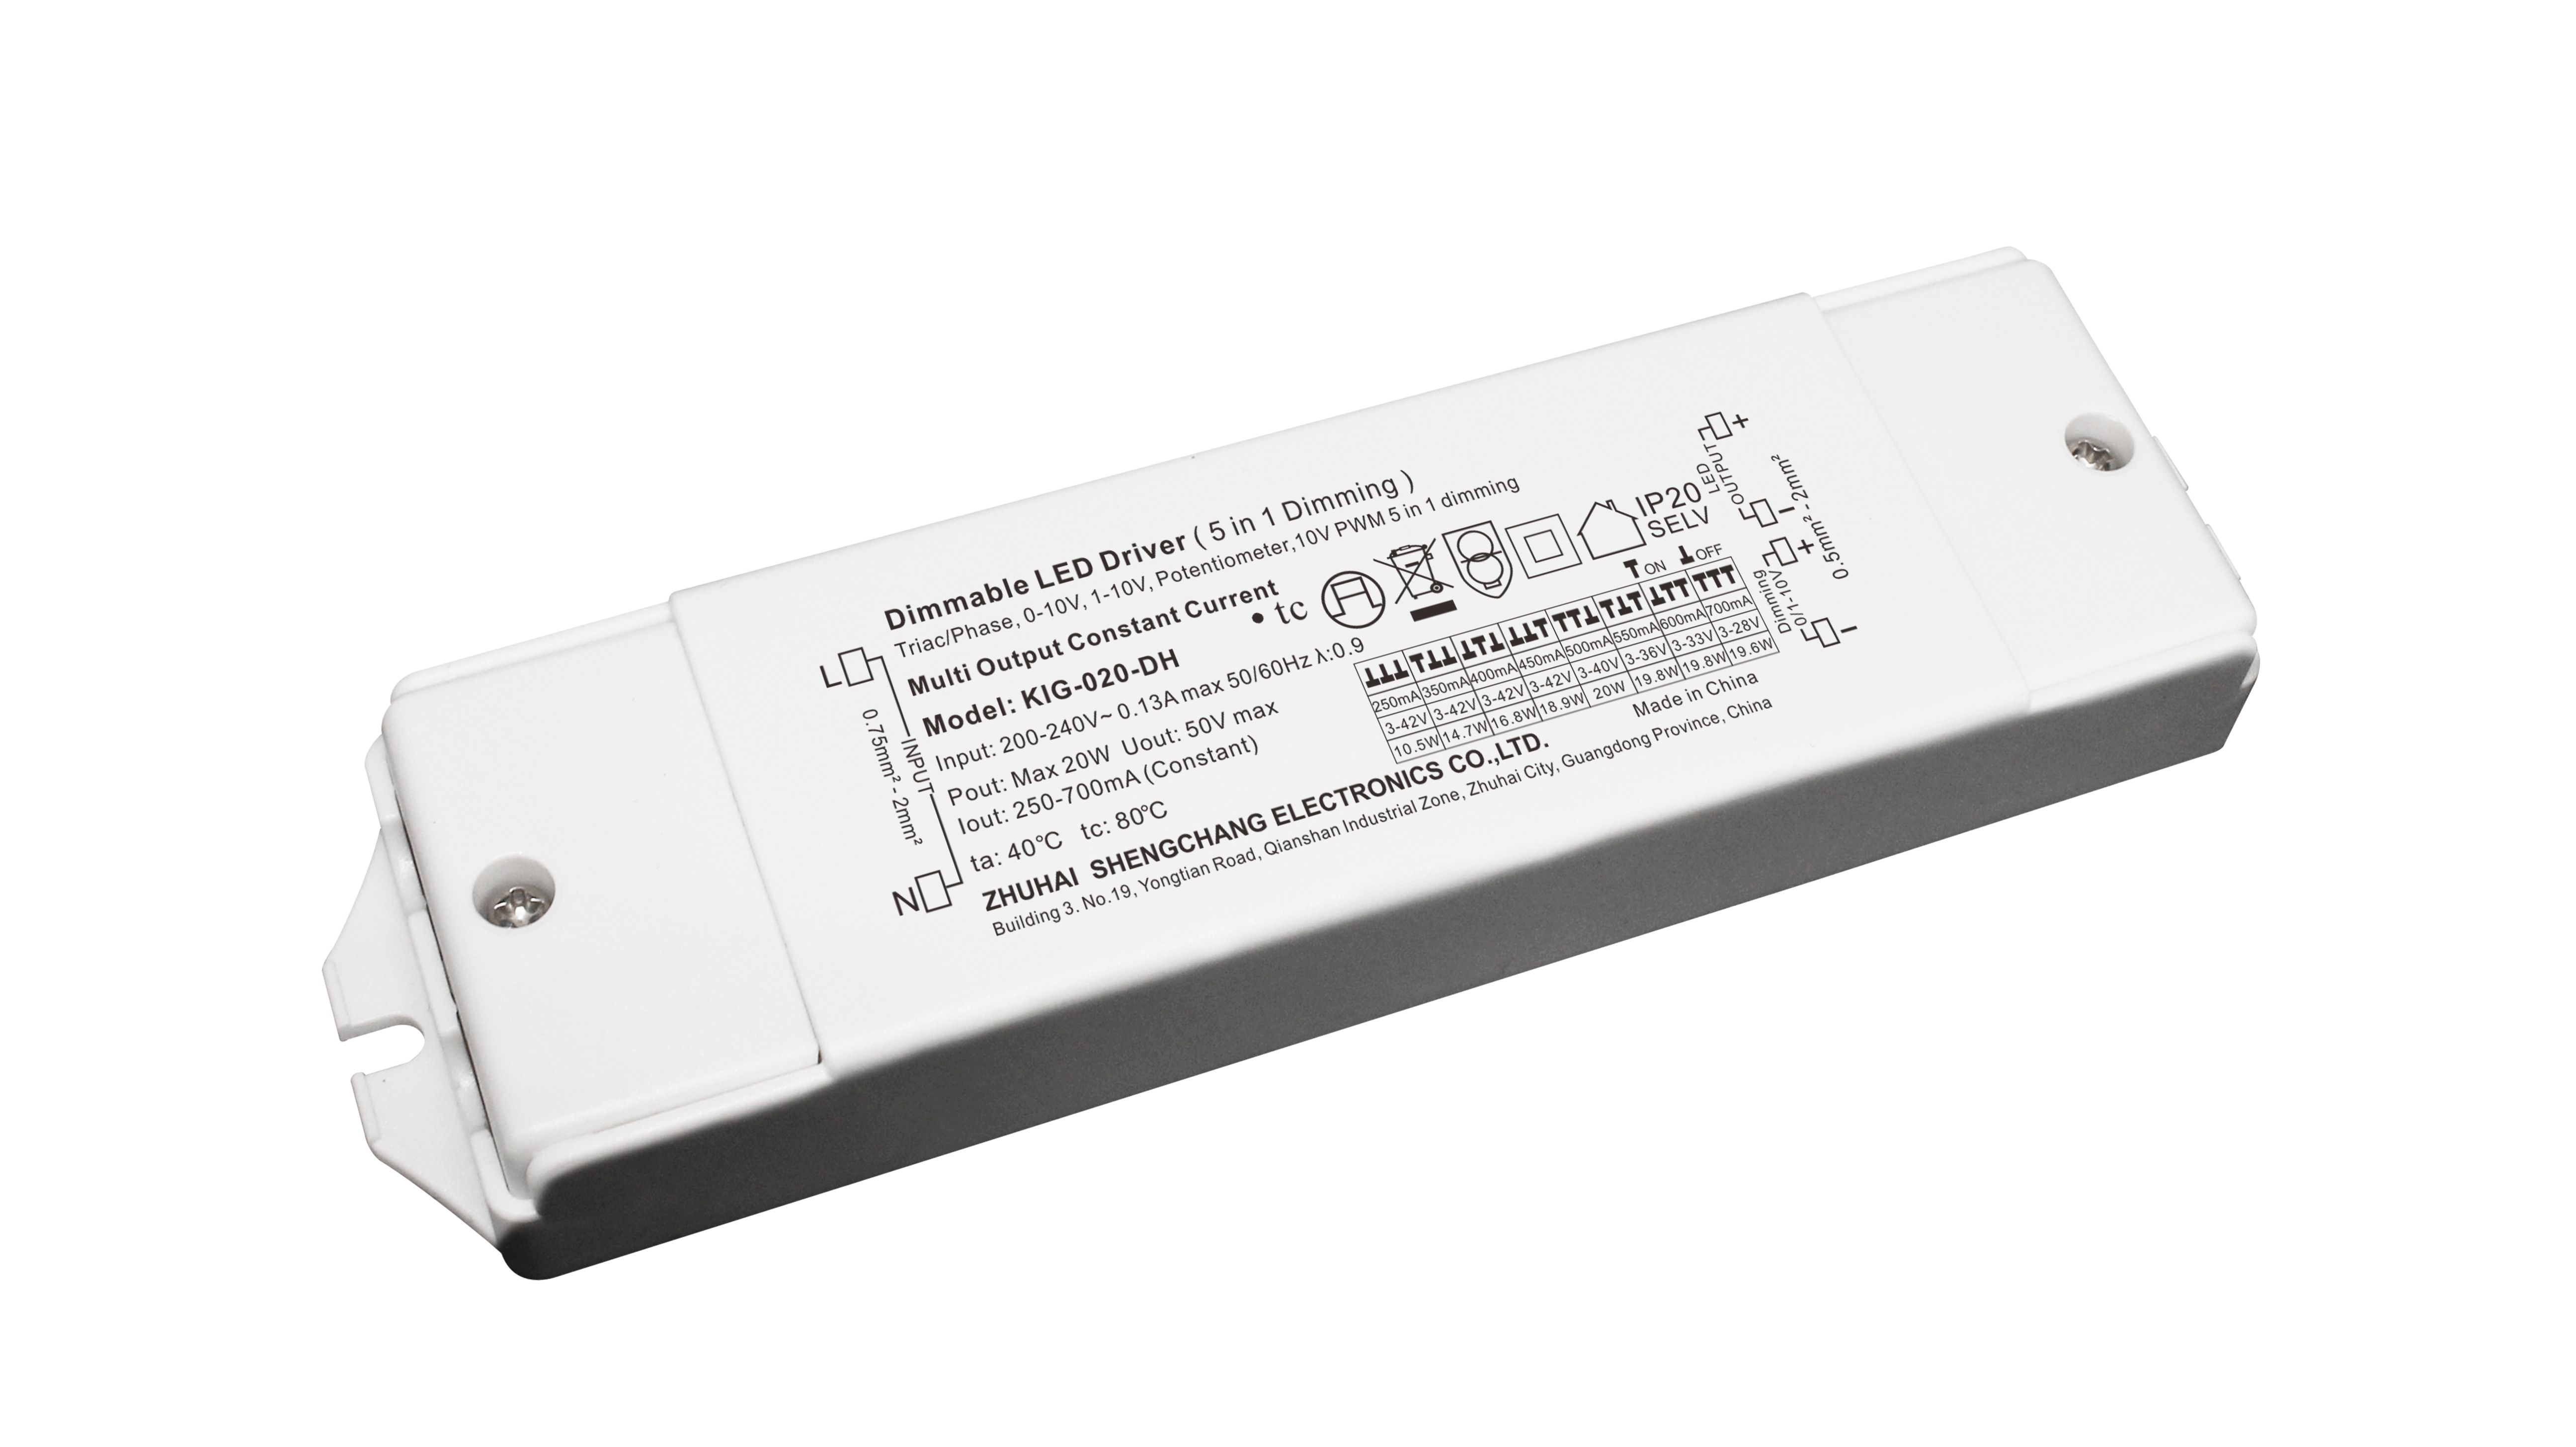 KIG-DH Series 20W Constant Current Triac&0/1-10V Dimmable LED driver